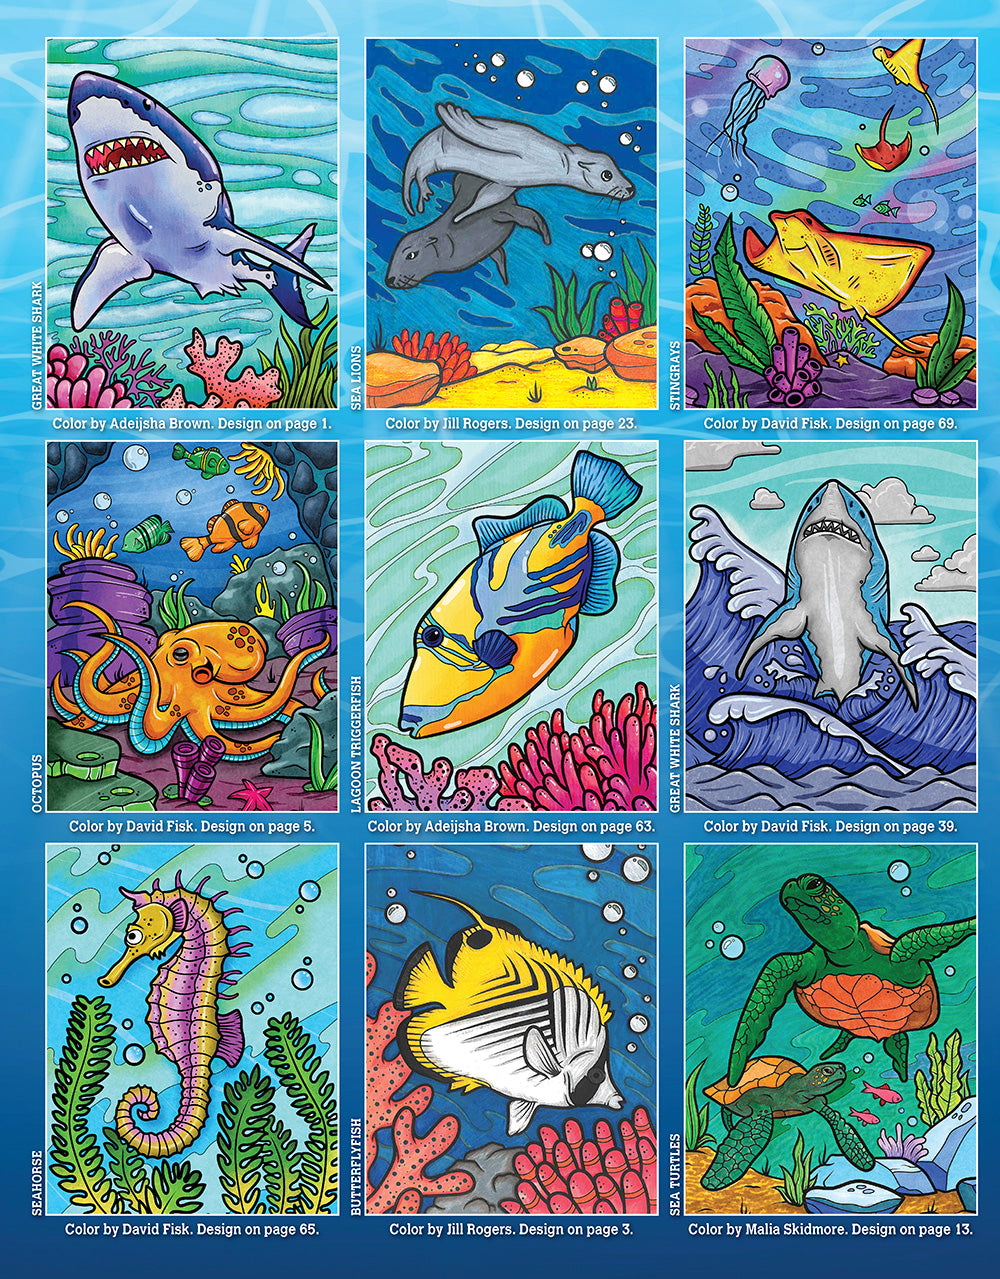 Sharks and Ocean Creatures Coloring Book